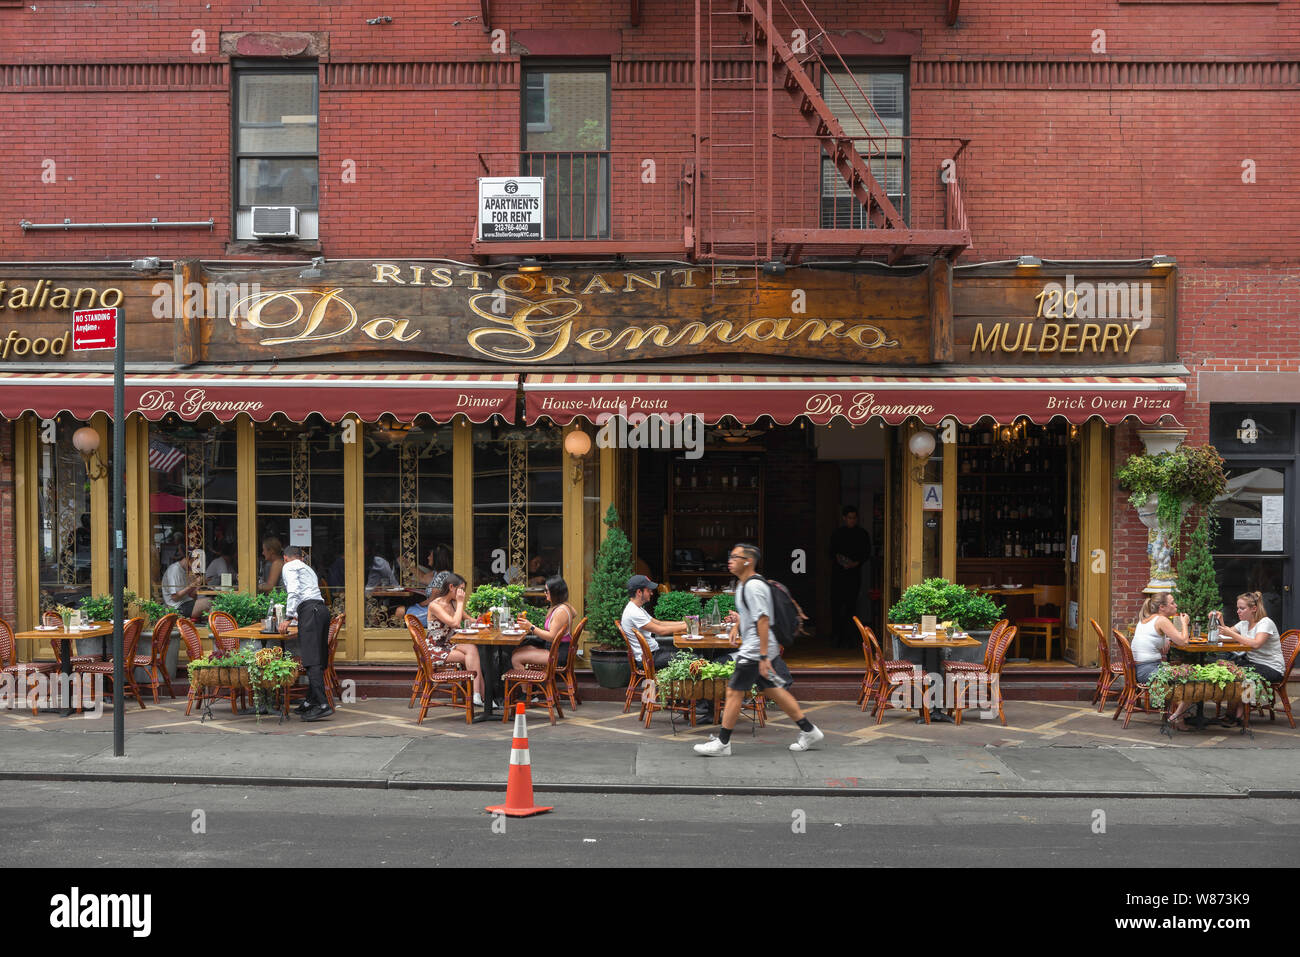 View of Ristorante Da Gennaro, a popular restaurant in Mulberry Street in the Little Italy district of Lower Manhattan, New York City, USA Stock Photo